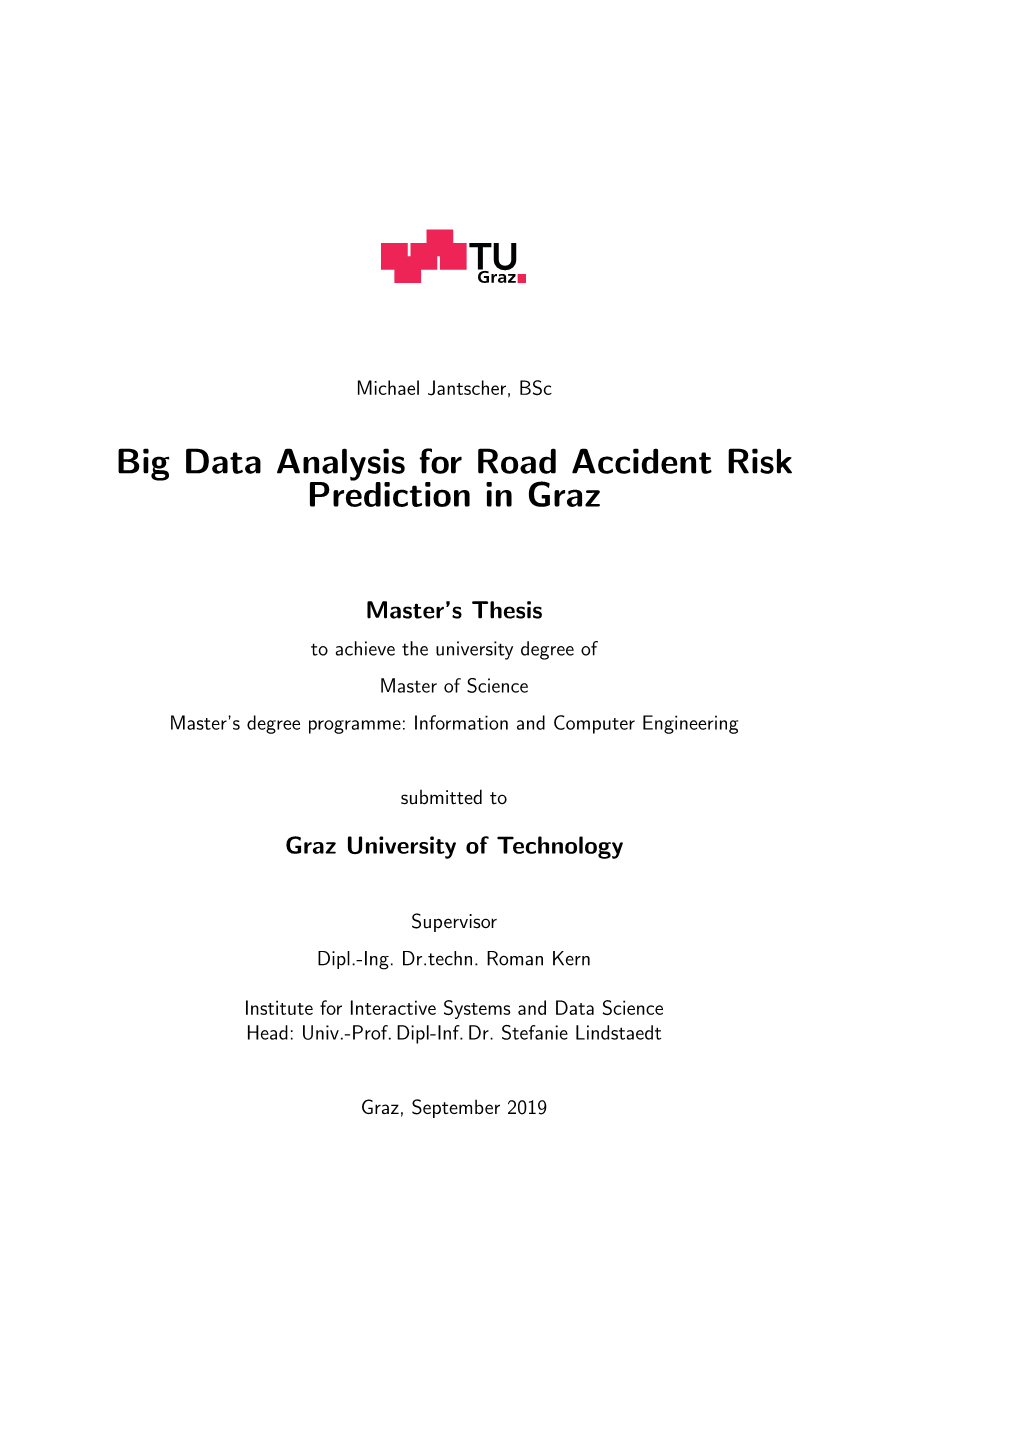 Big Data Analysis for Road Accident Risk Prediction in Graz